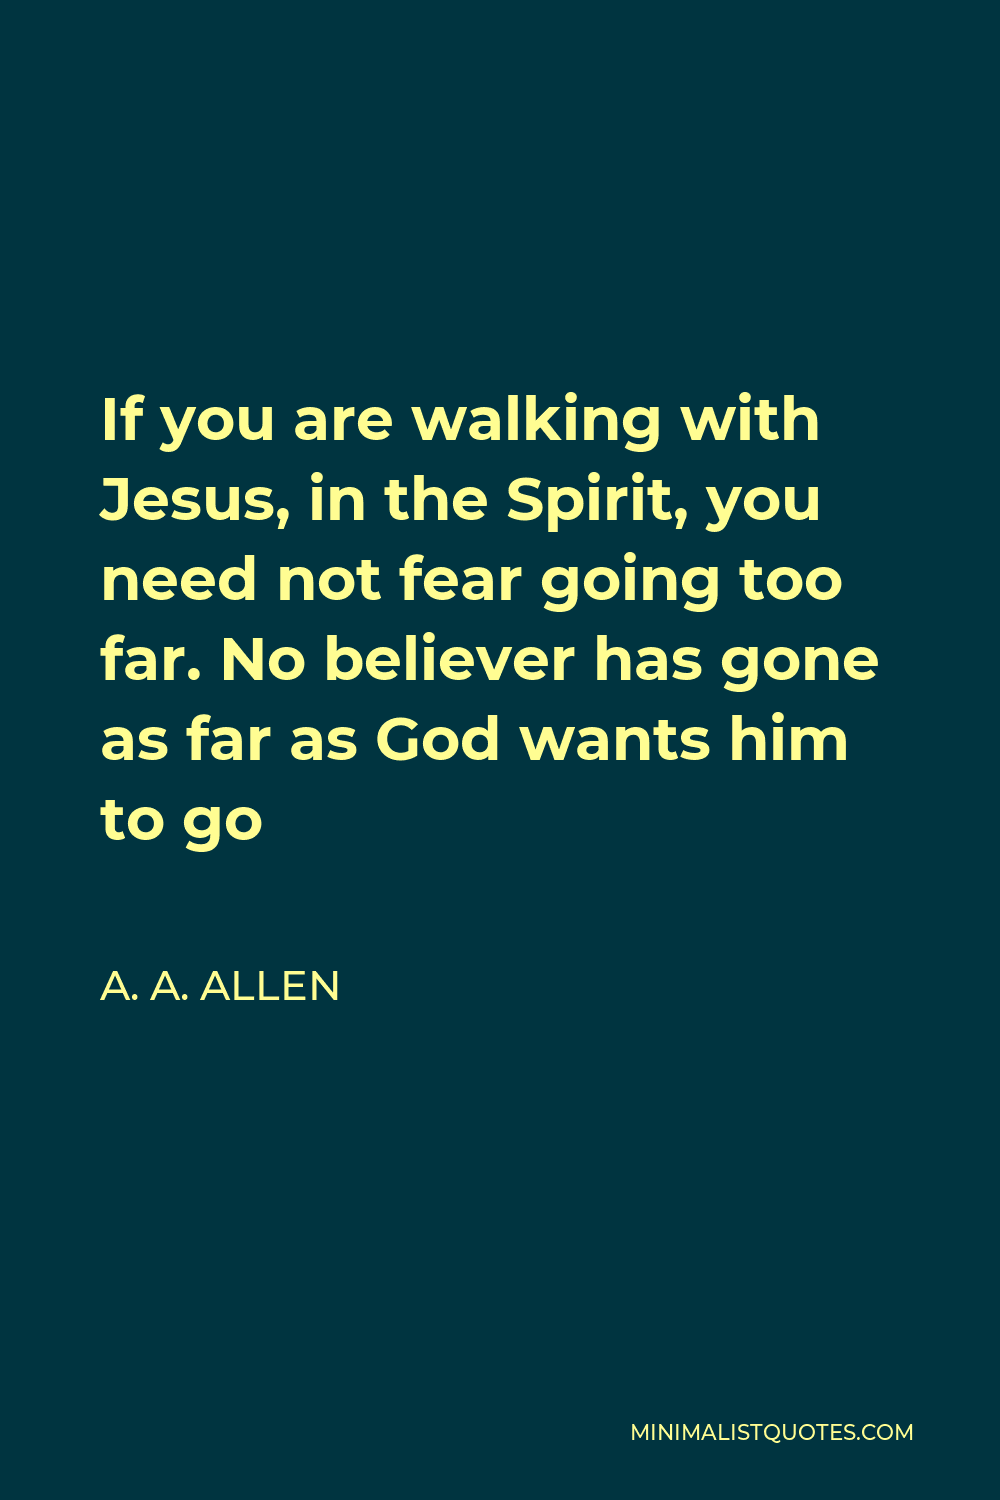 A. A. Allen Quote - If you are walking with Jesus, in the Spirit, you need not fear going too far. No believer has gone as far as God wants him to go